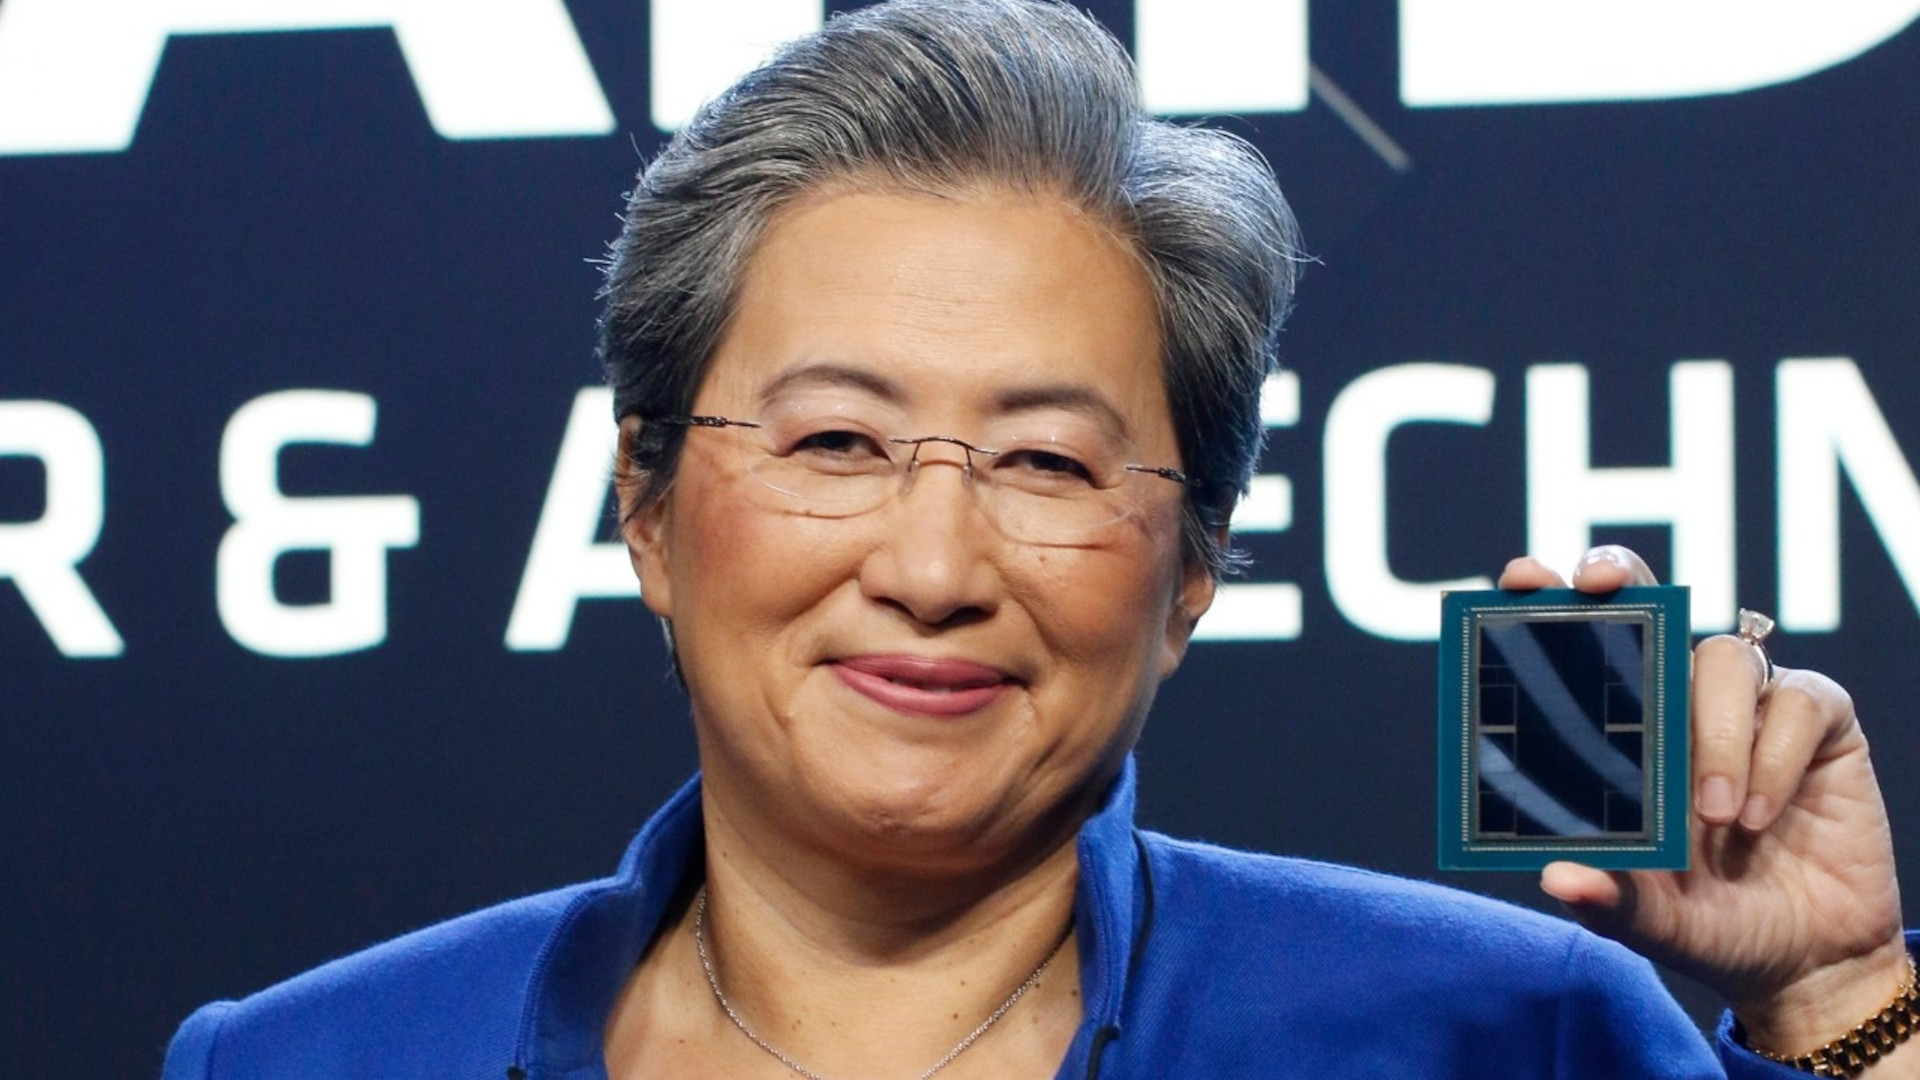 AMD CEO is 